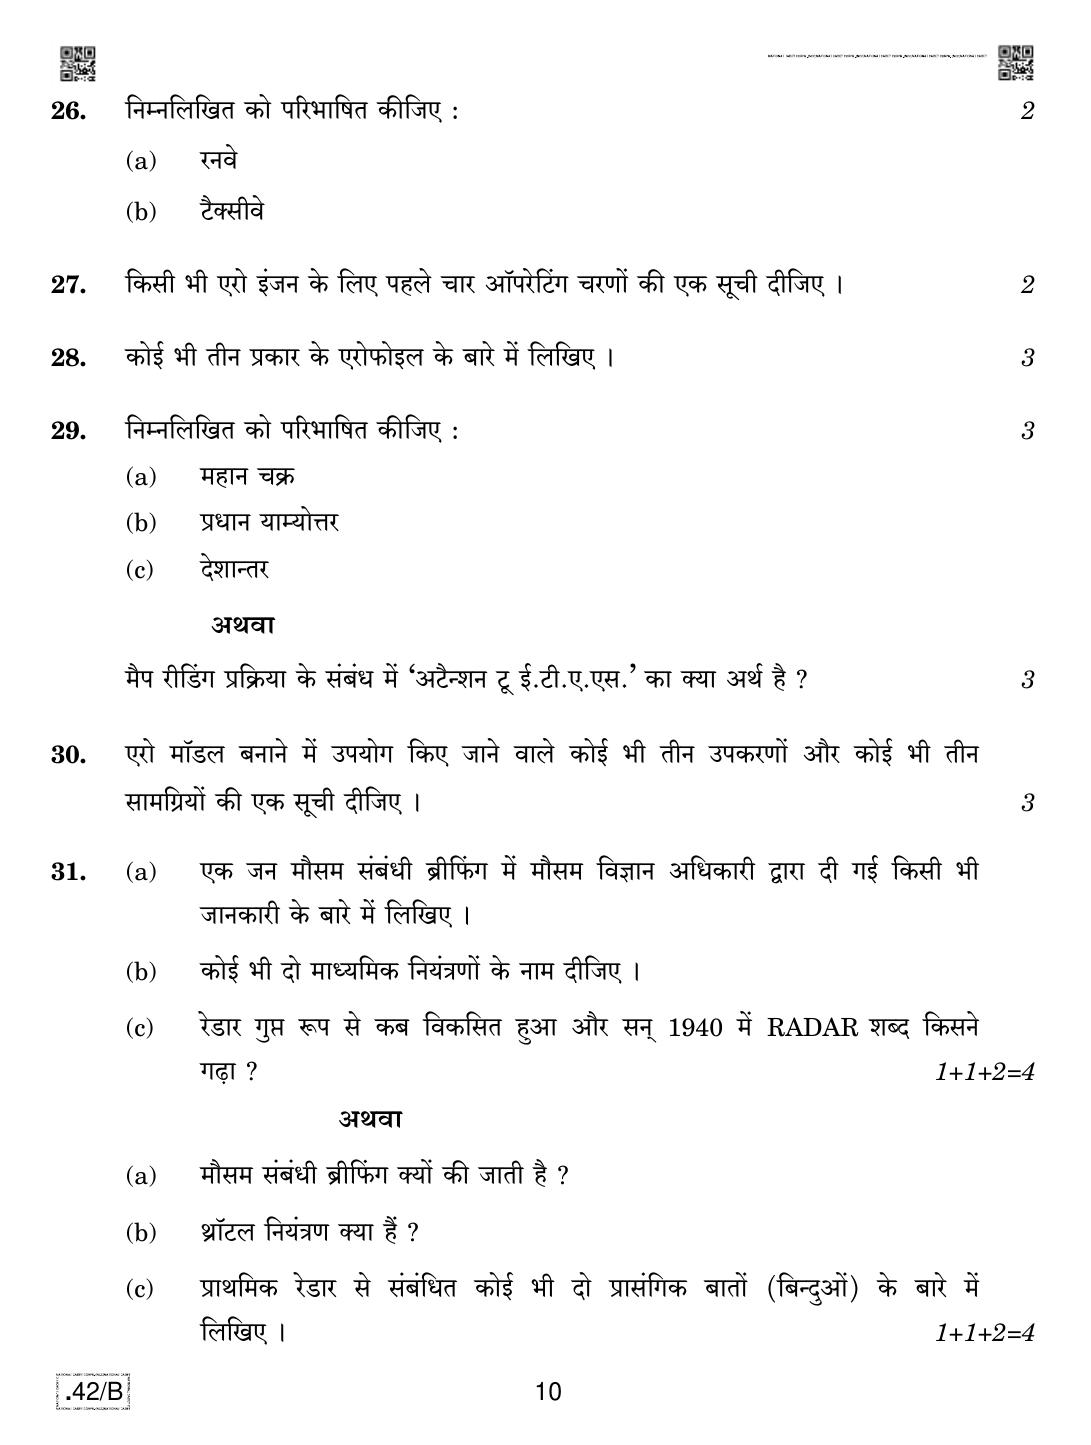 CBSE Class 12 NCC 2020 Compartment Question Paper - Page 10